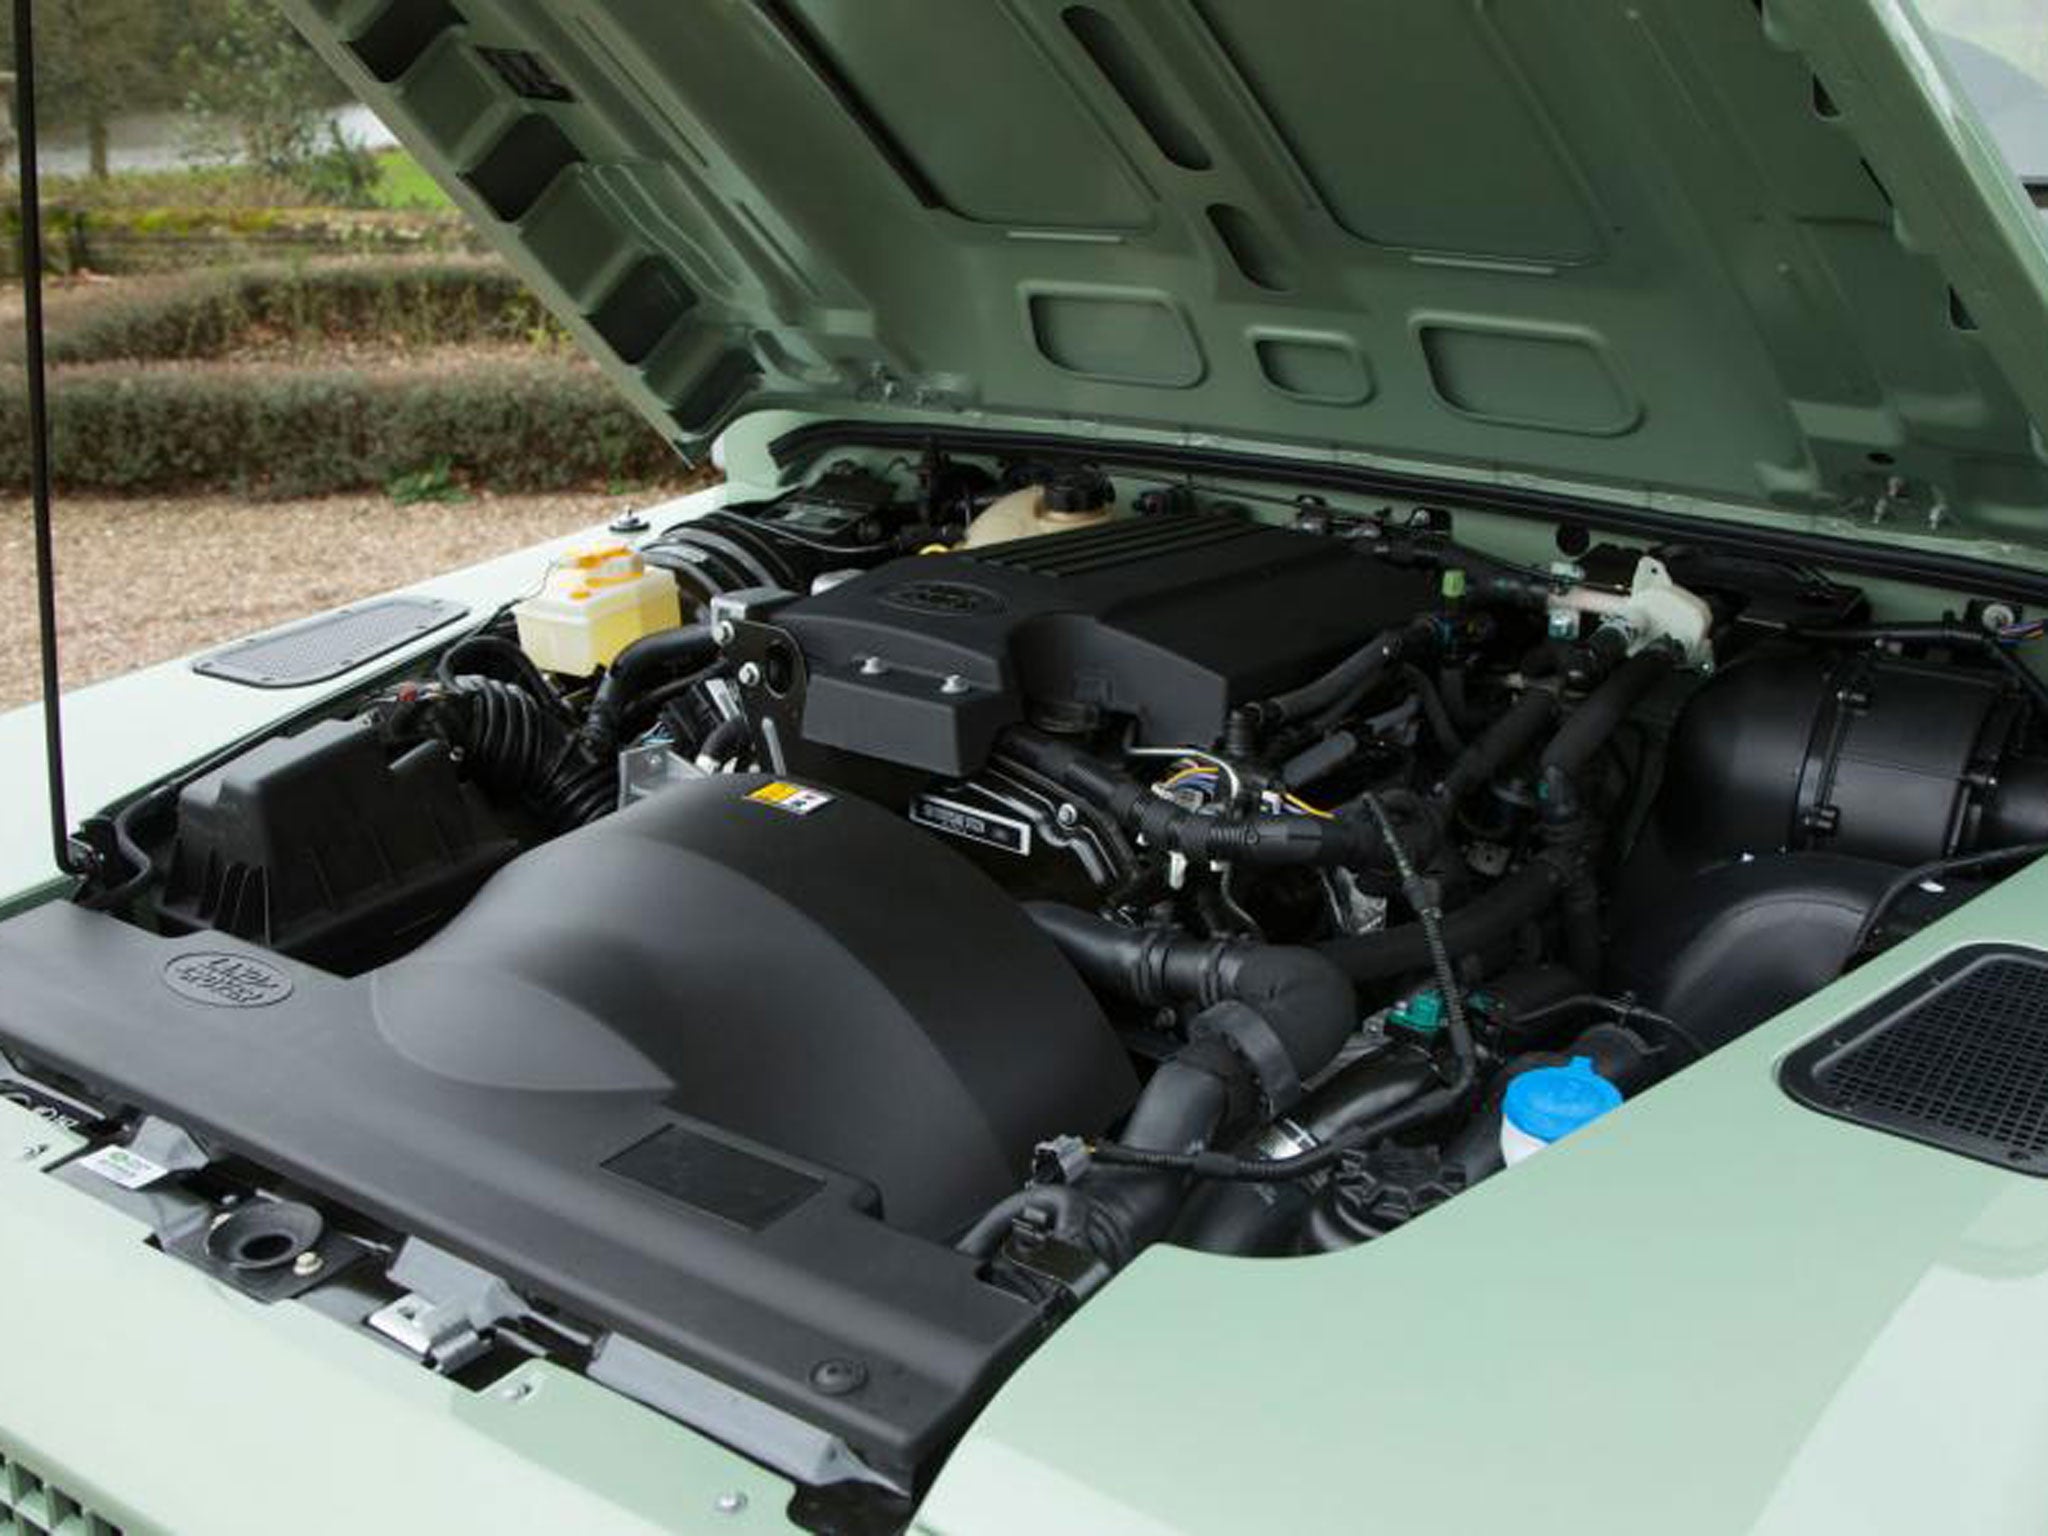 The final car has an up-to-date 2.2-litre diesel